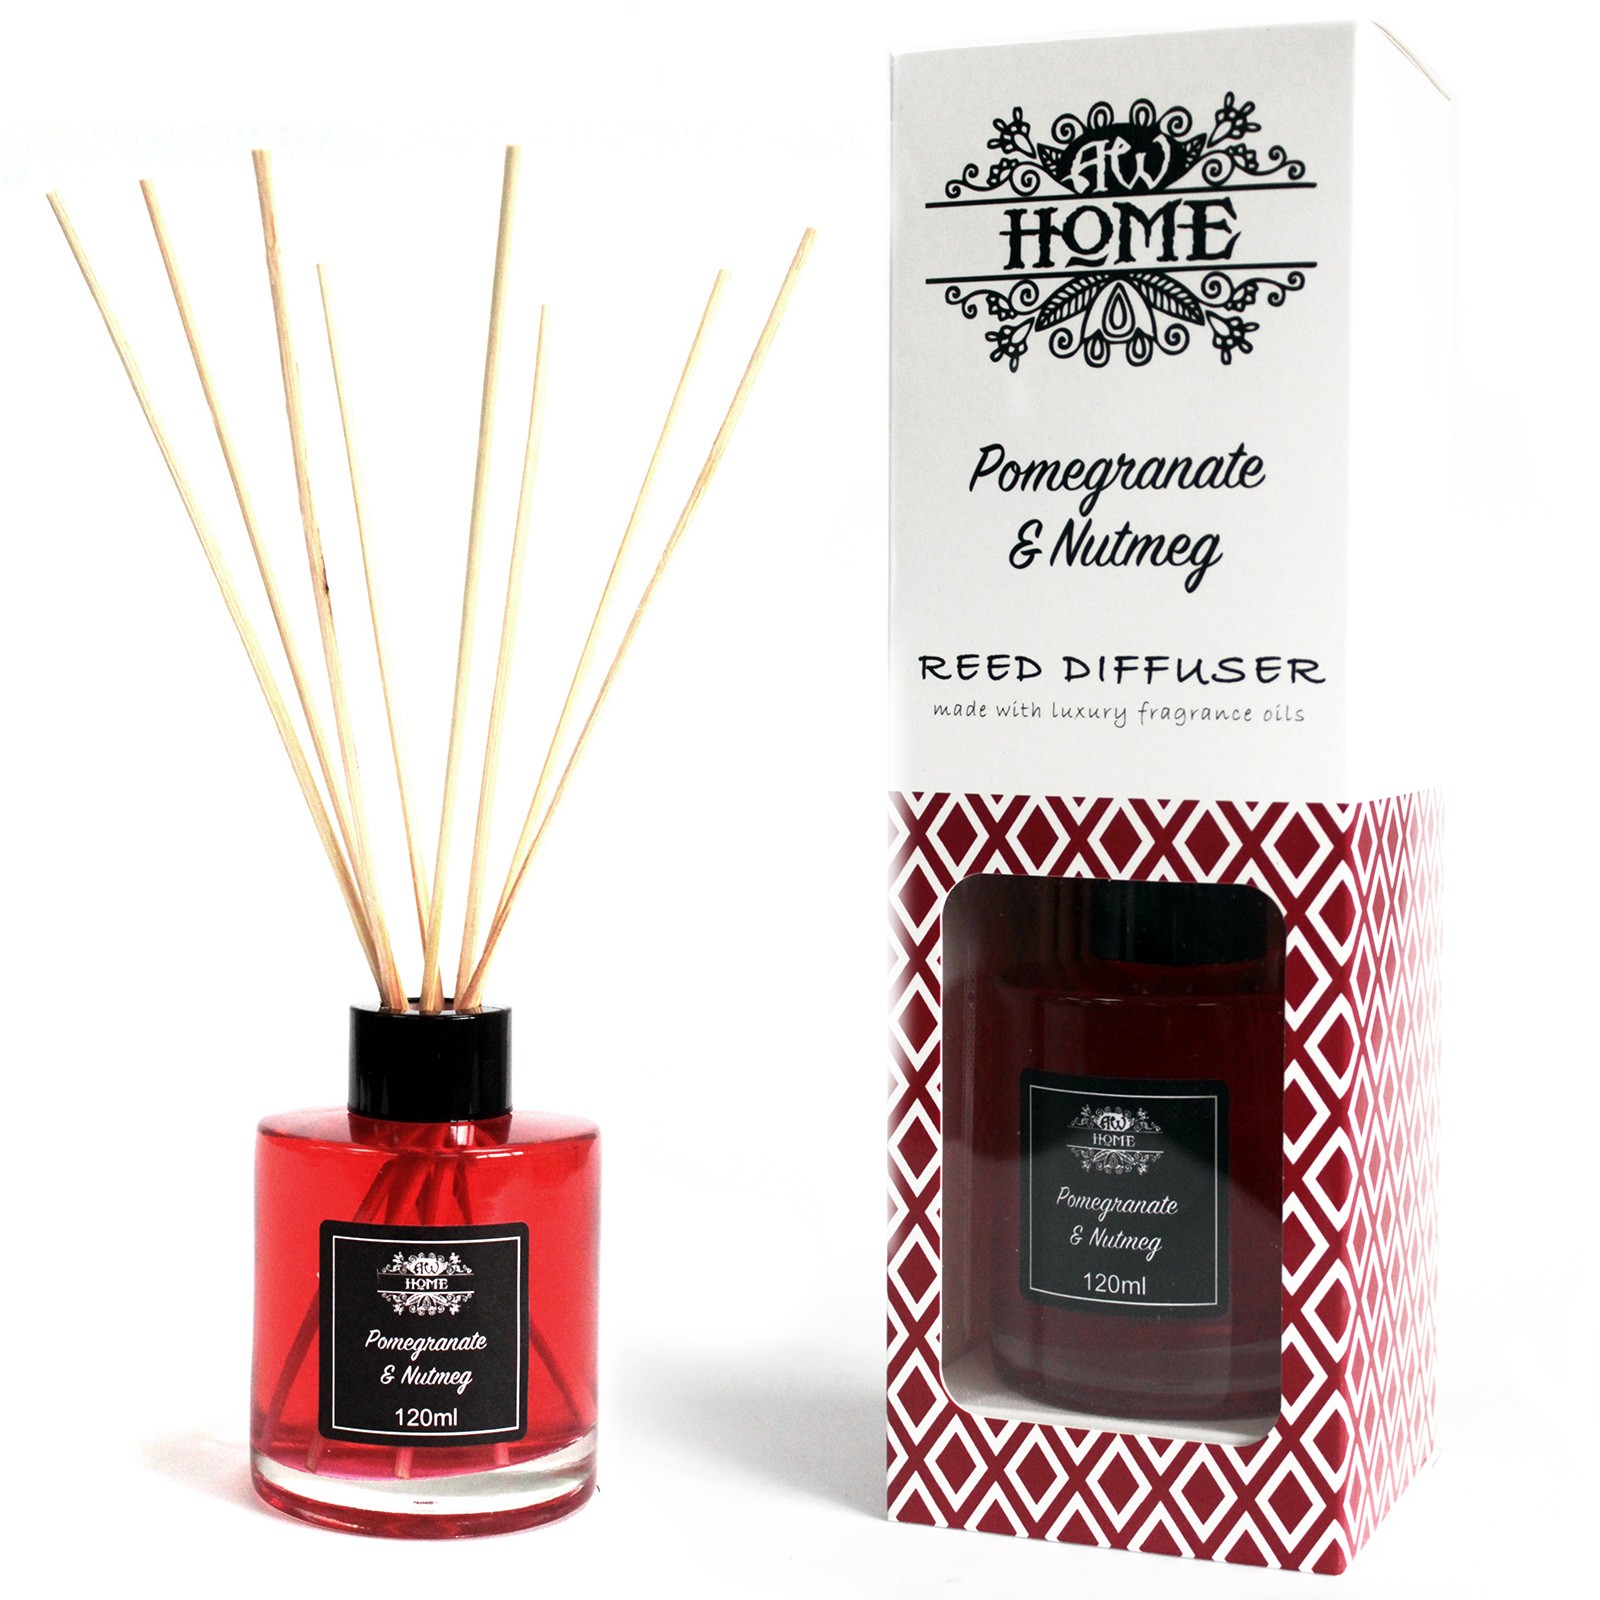 Pomegranate & Nutmeg - Home Fragrance Reed Diffuser - 120ml With Reeds